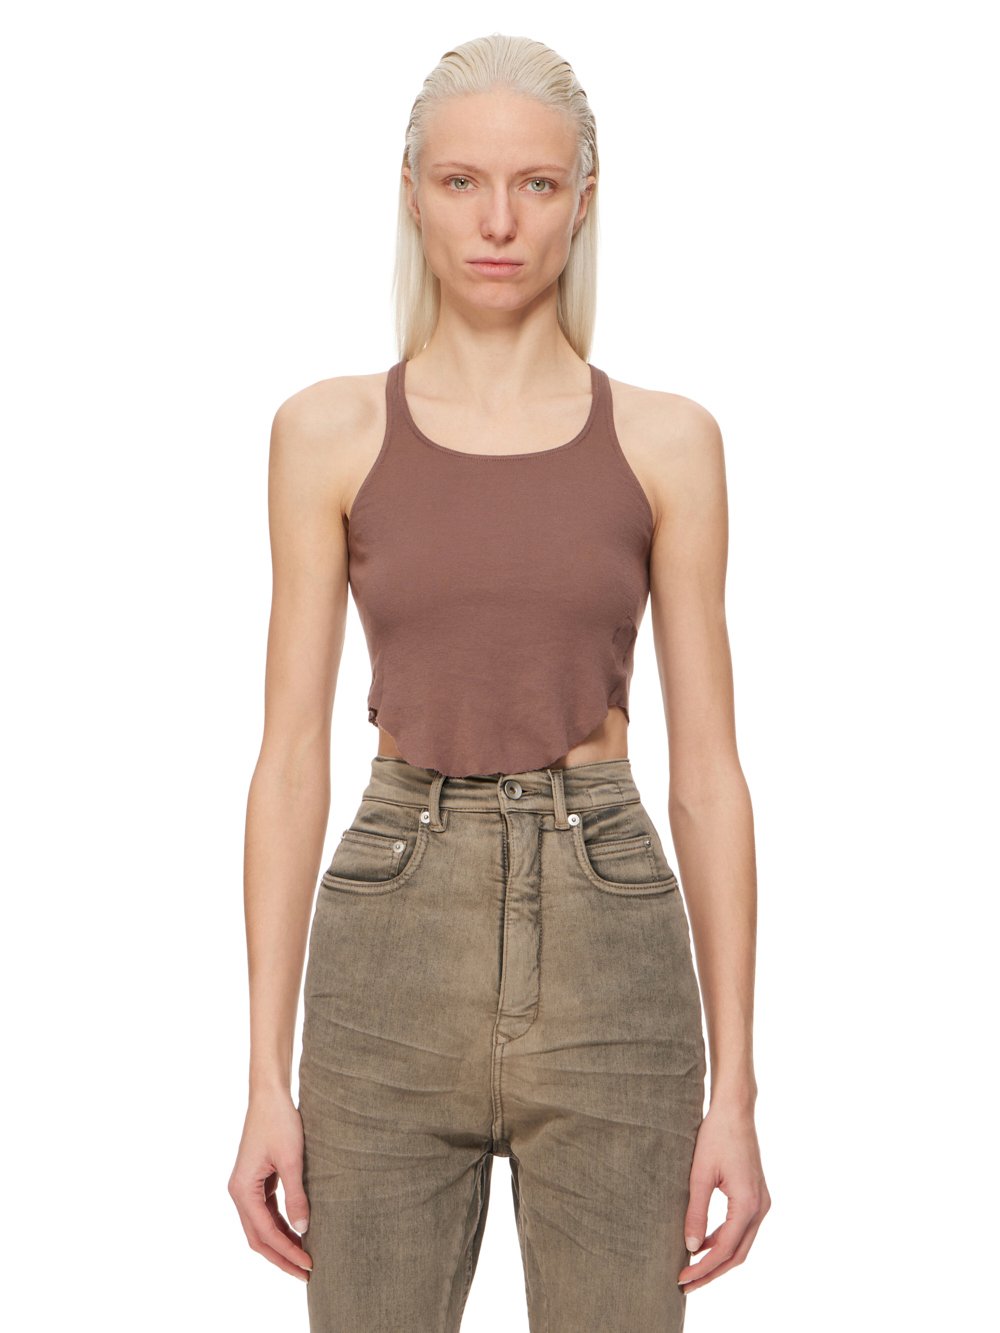 DRKSHDW FW23 LUXOR BASIC TANK CROPPED IN MAUVE LIGHTWEIGHT COTTON GAUZE JERSEY 